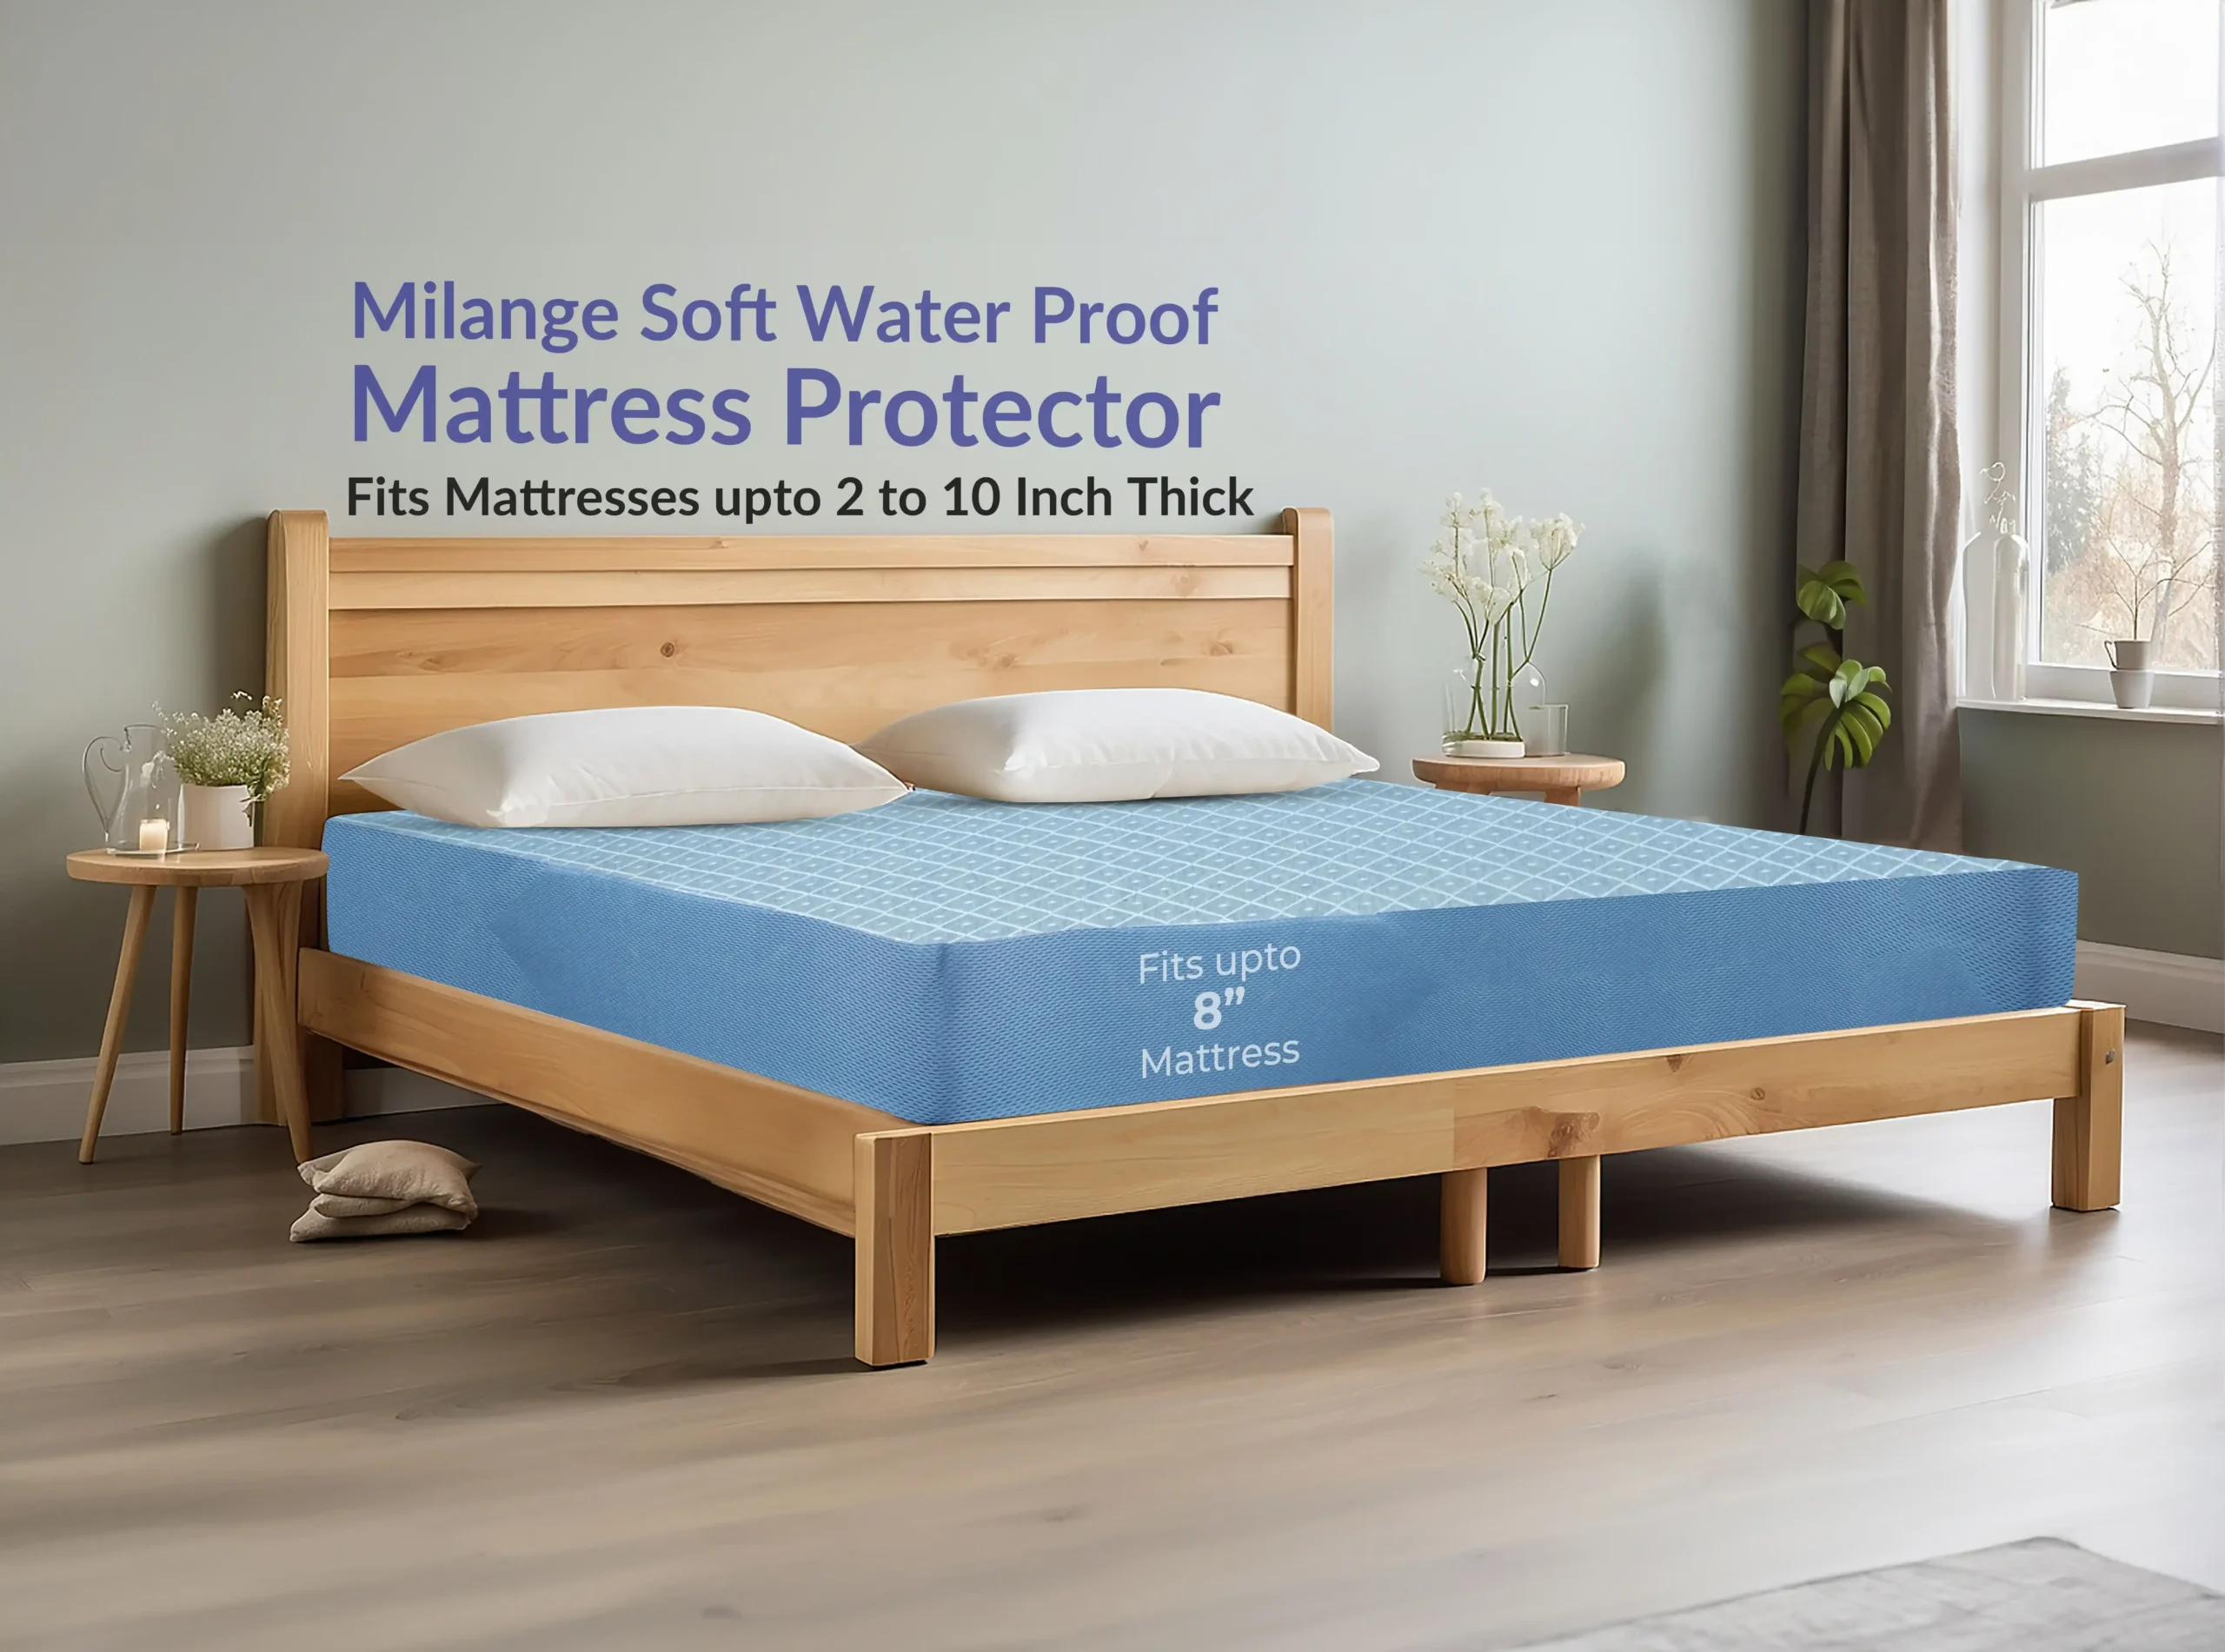 Milange Soft Water Proof Mattress Protector